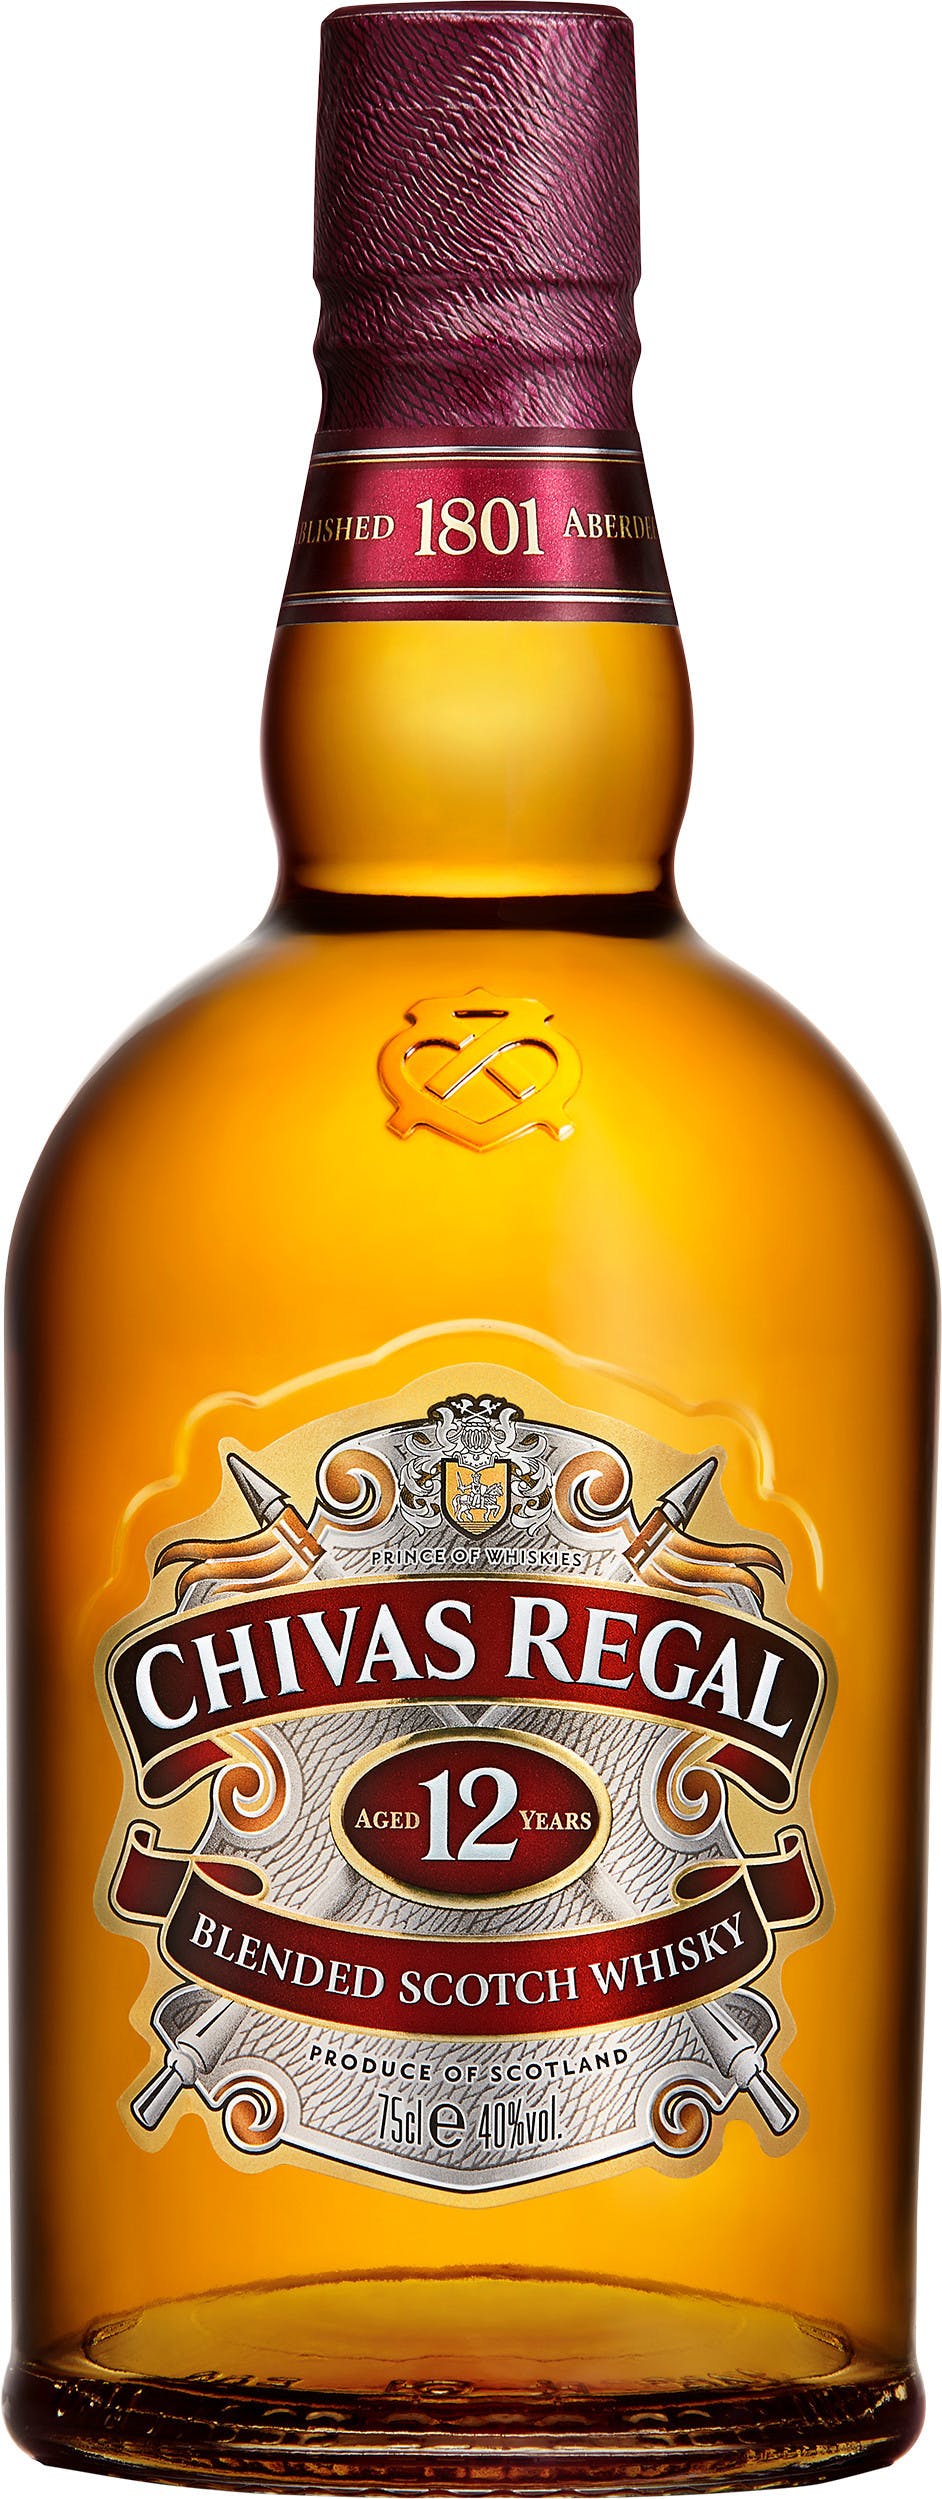 Chivas Regal 12 Years Old Blended Scotch Whisky 40% Vol. 0,35l in Gift